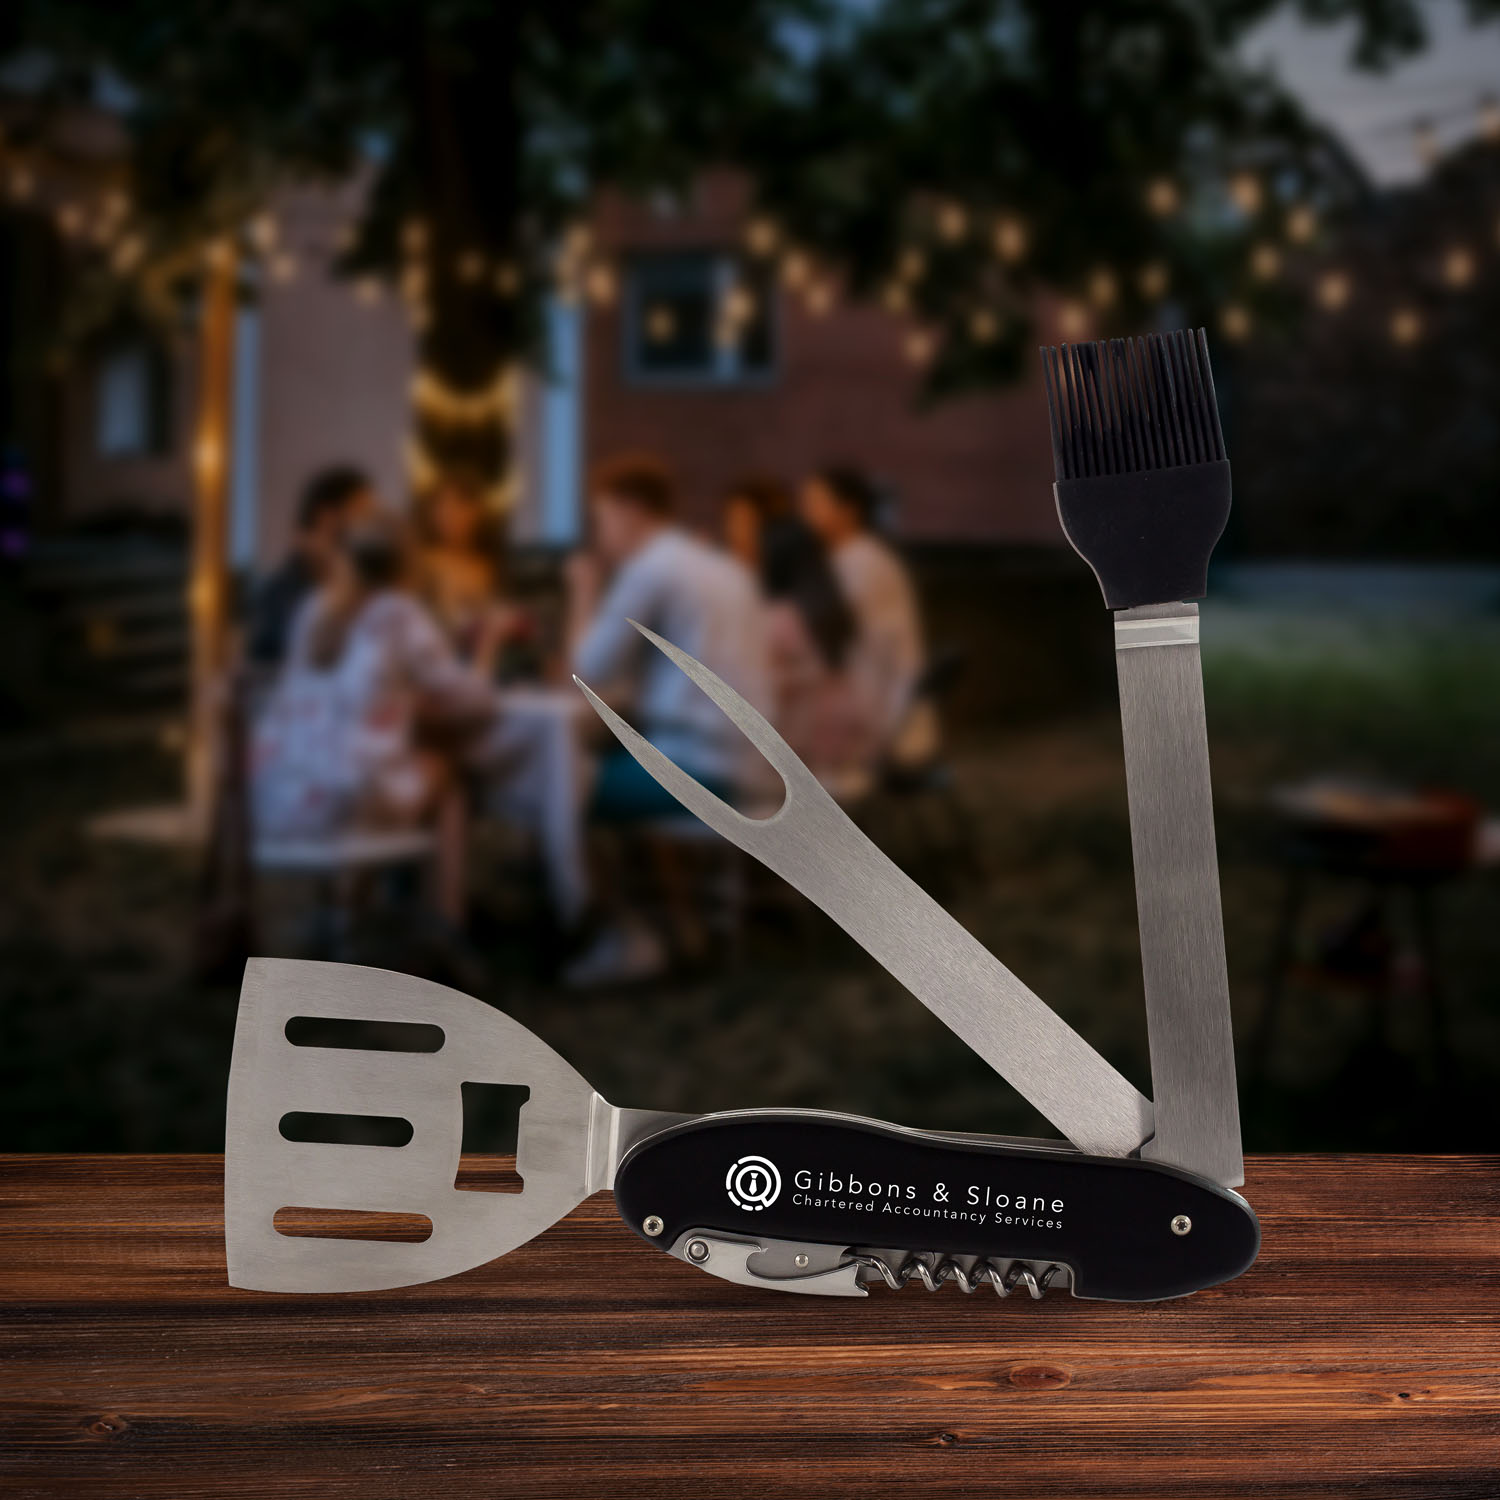 Multi Function BBQ Tool Features